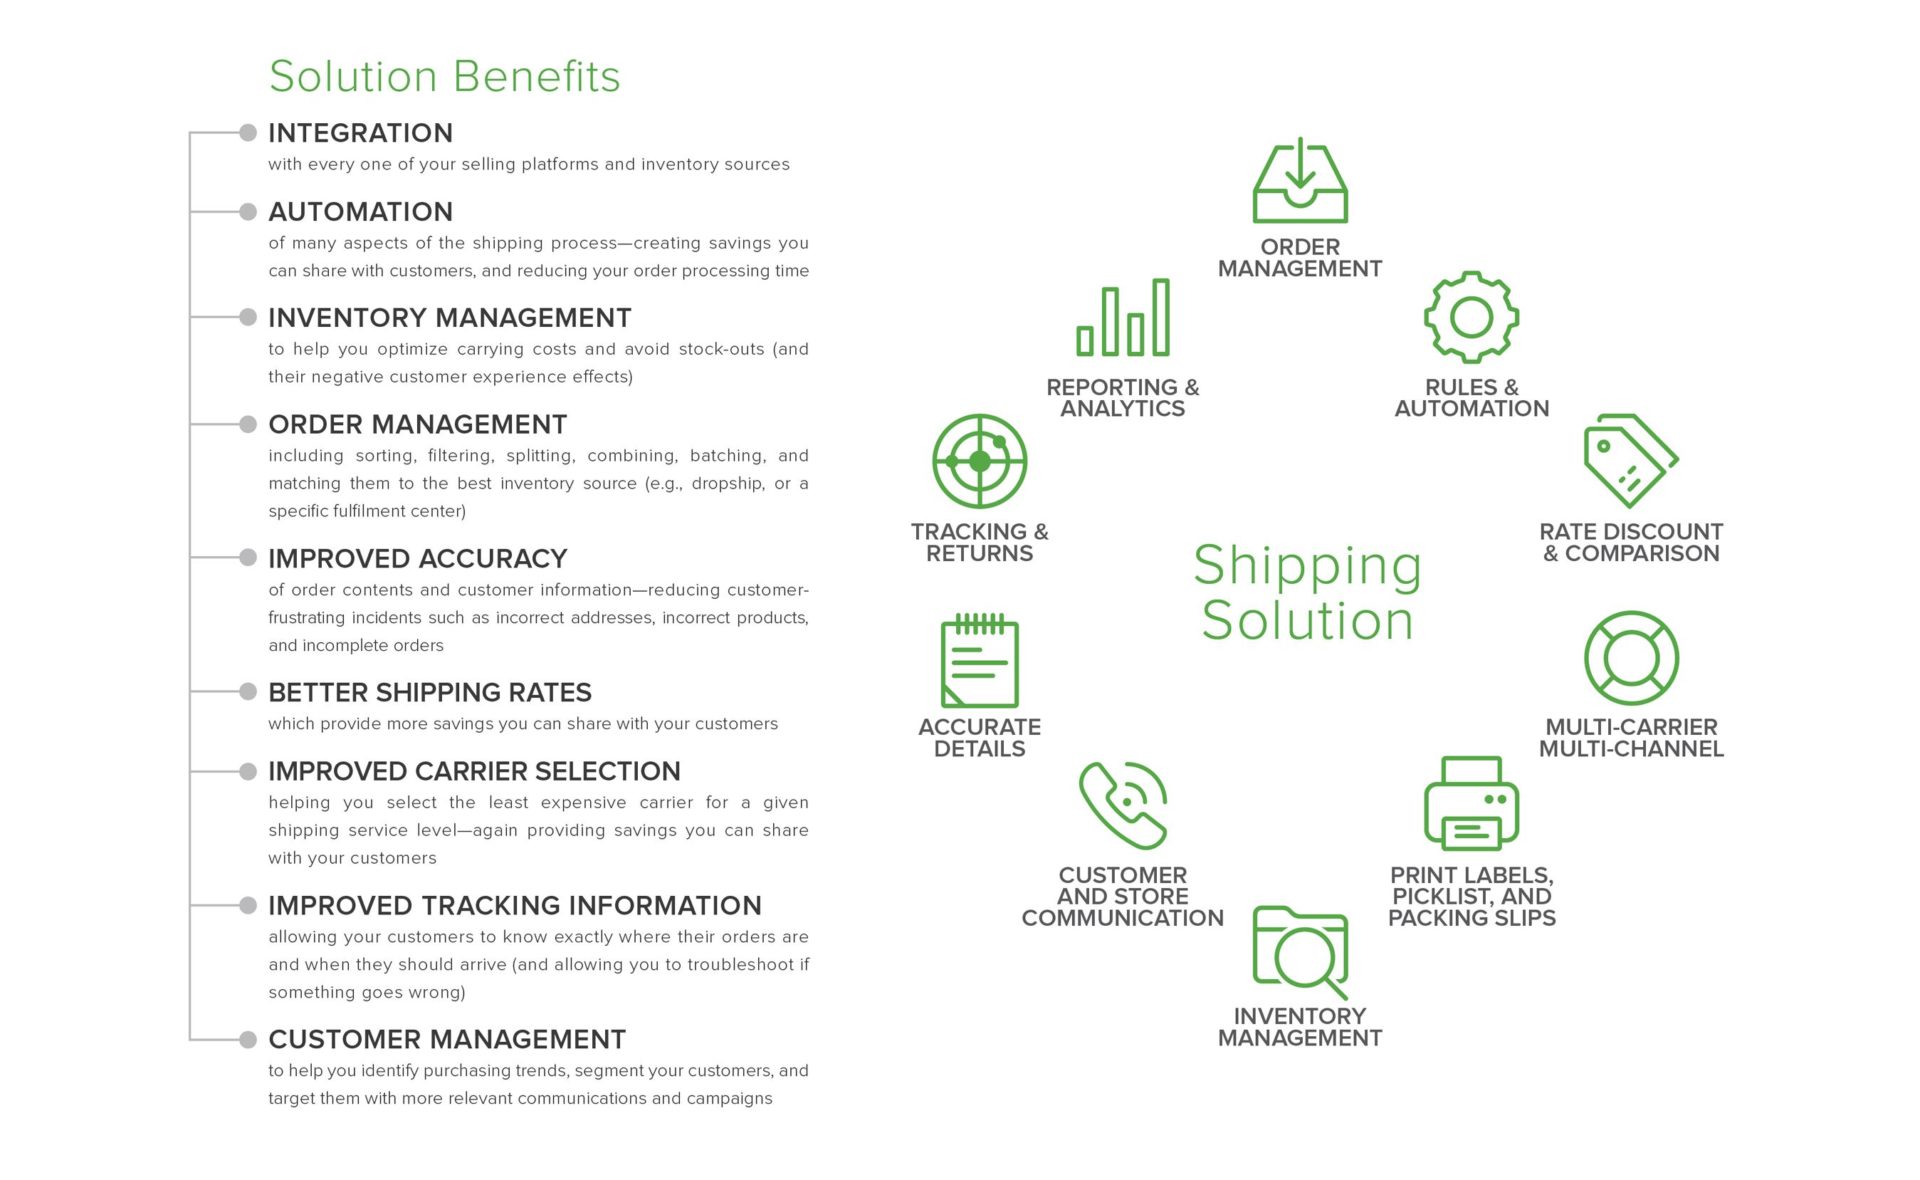 Speedy shipping and cost efficiency: can you have both? - Fluent Commerce